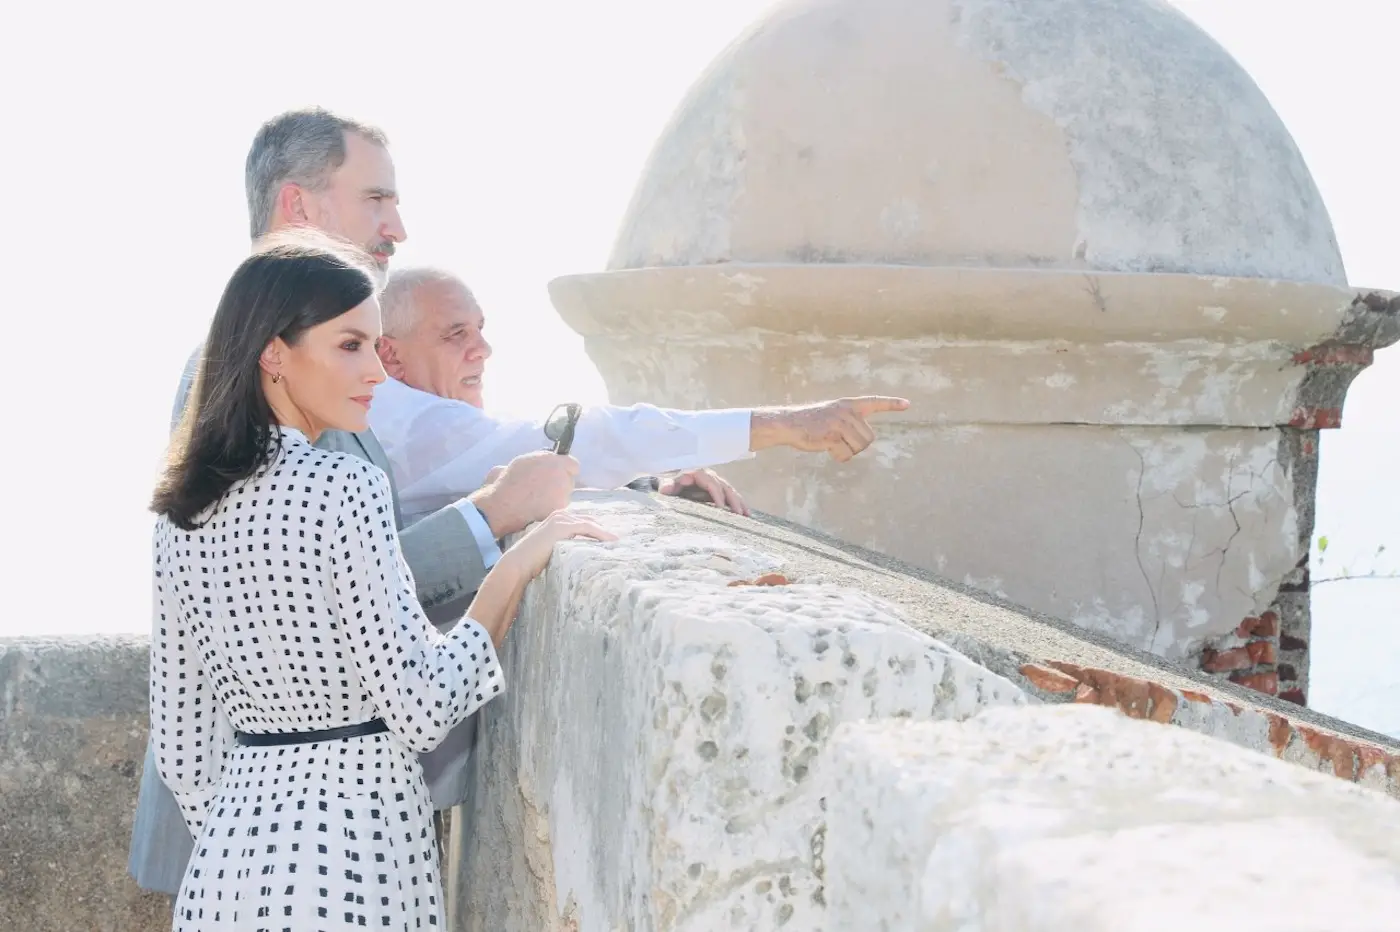 King Felipe and Queen Letizia finished the last day of Cuba State Visit with a Busy Schedule